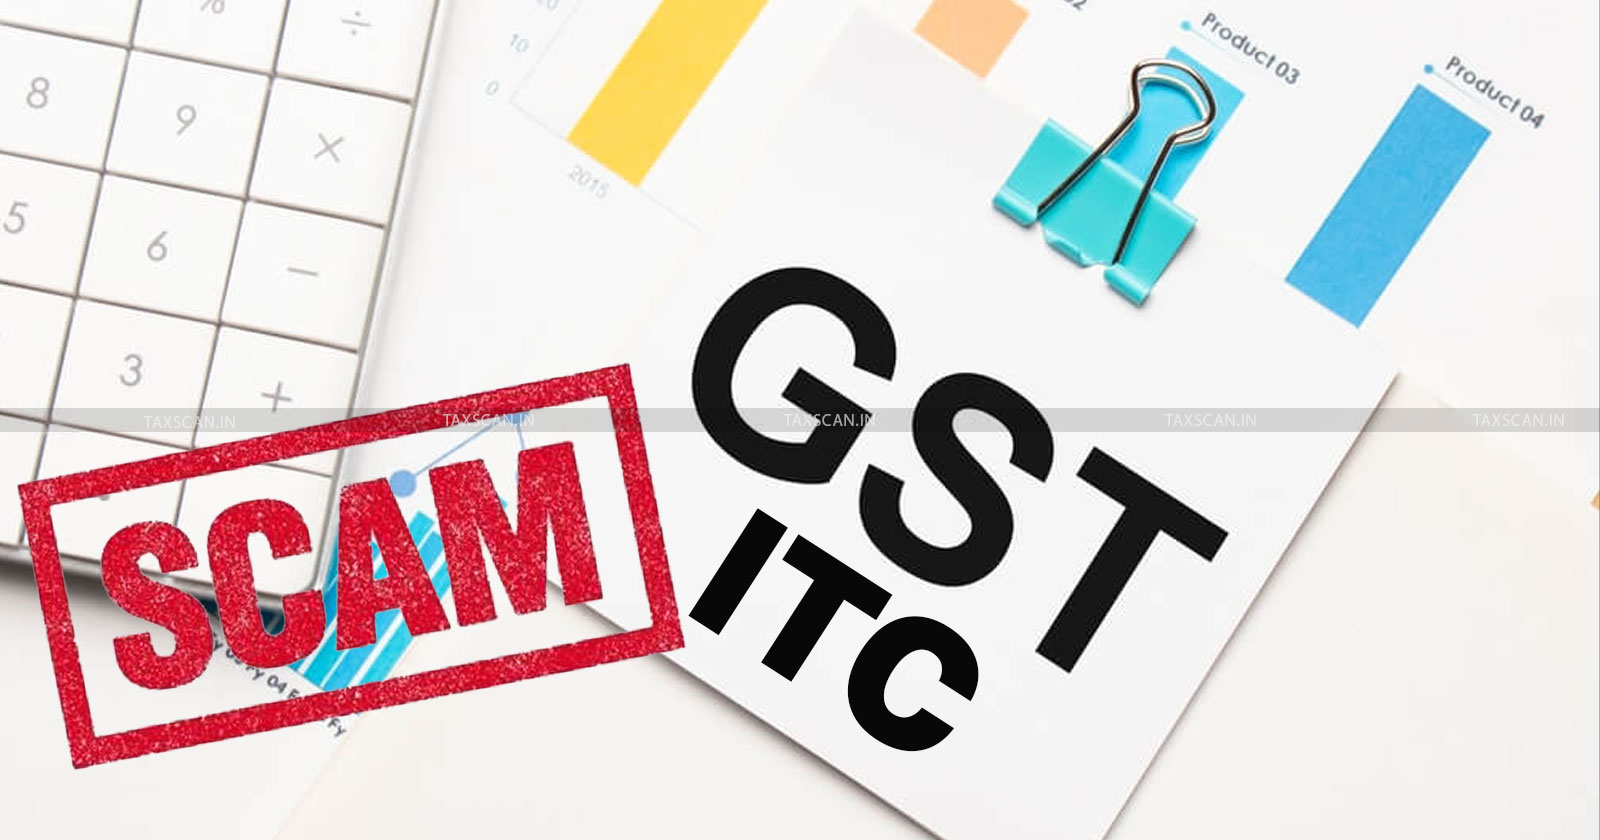 GST- ITC Scam - Andhra Pradesh HC - Revision Petition - Police Custody - TDP Leader's Son - taxscan